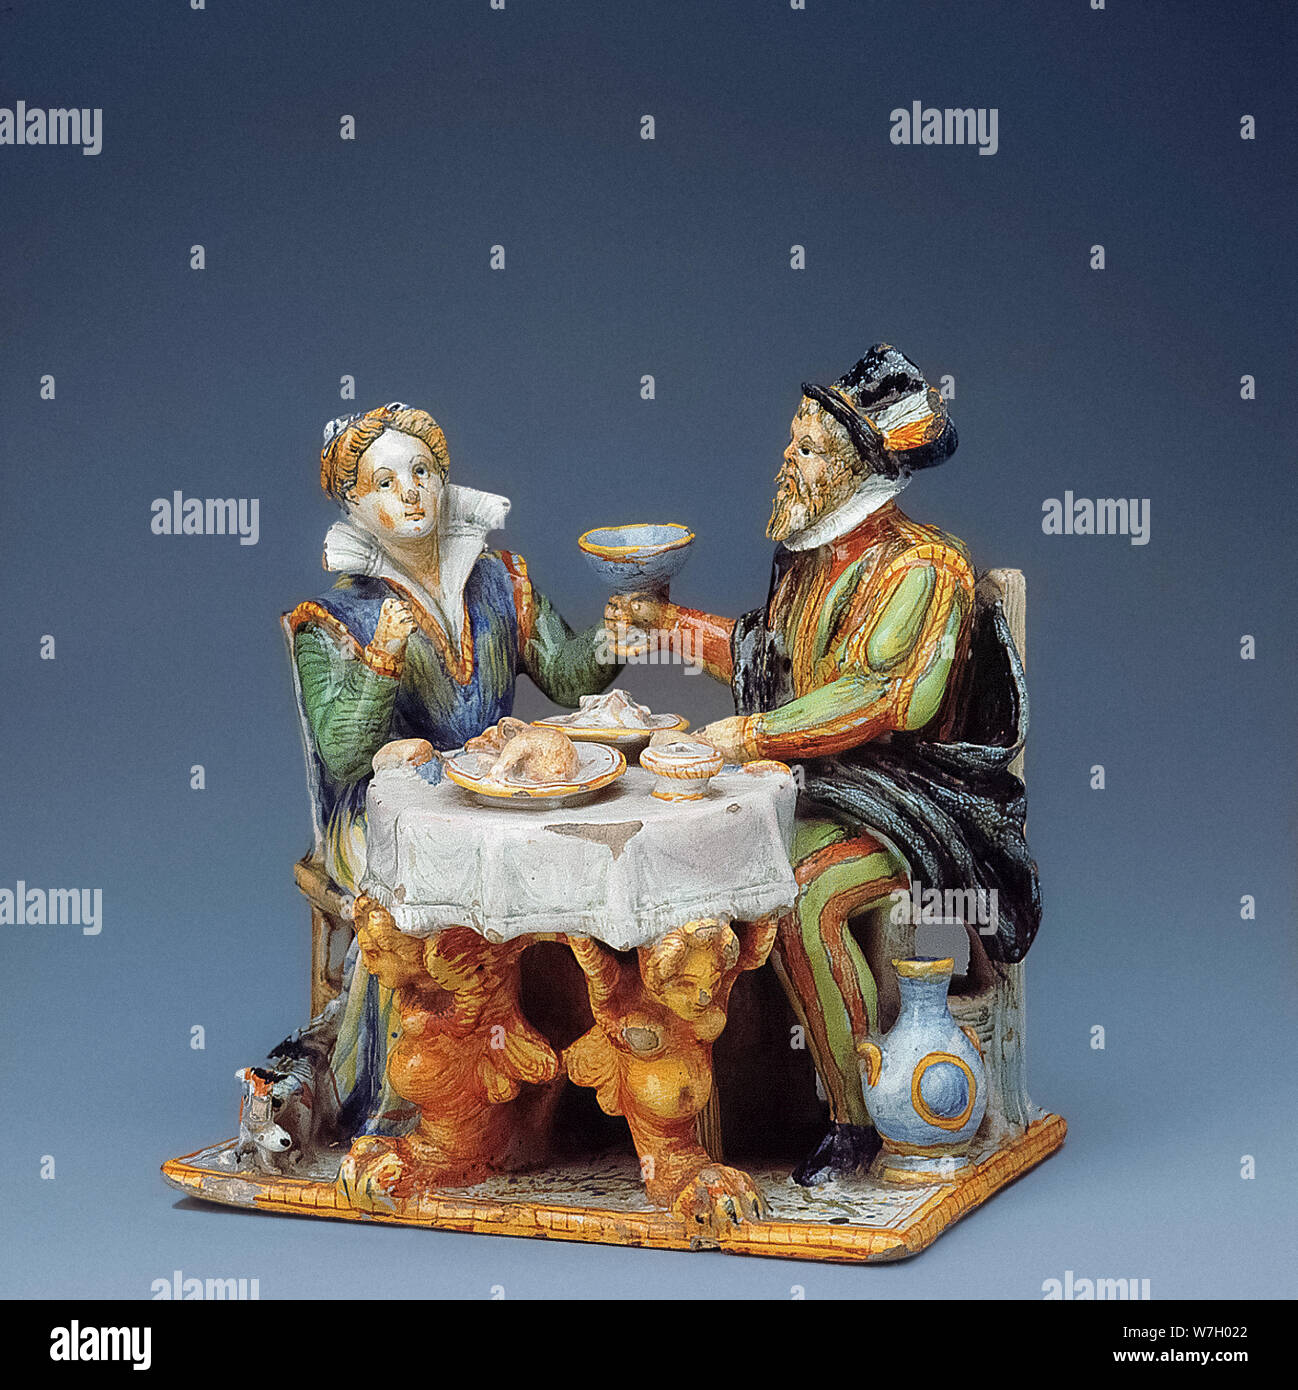 Italy Marche Pesaro Civic Museum - Patanazzi laboratory “Gruppo Plastico con due personaggi a tavola ” ( Plastic group with two characters at the table ) - late 16th-early 17th century Majolica painted in polychrome, Stock Photo